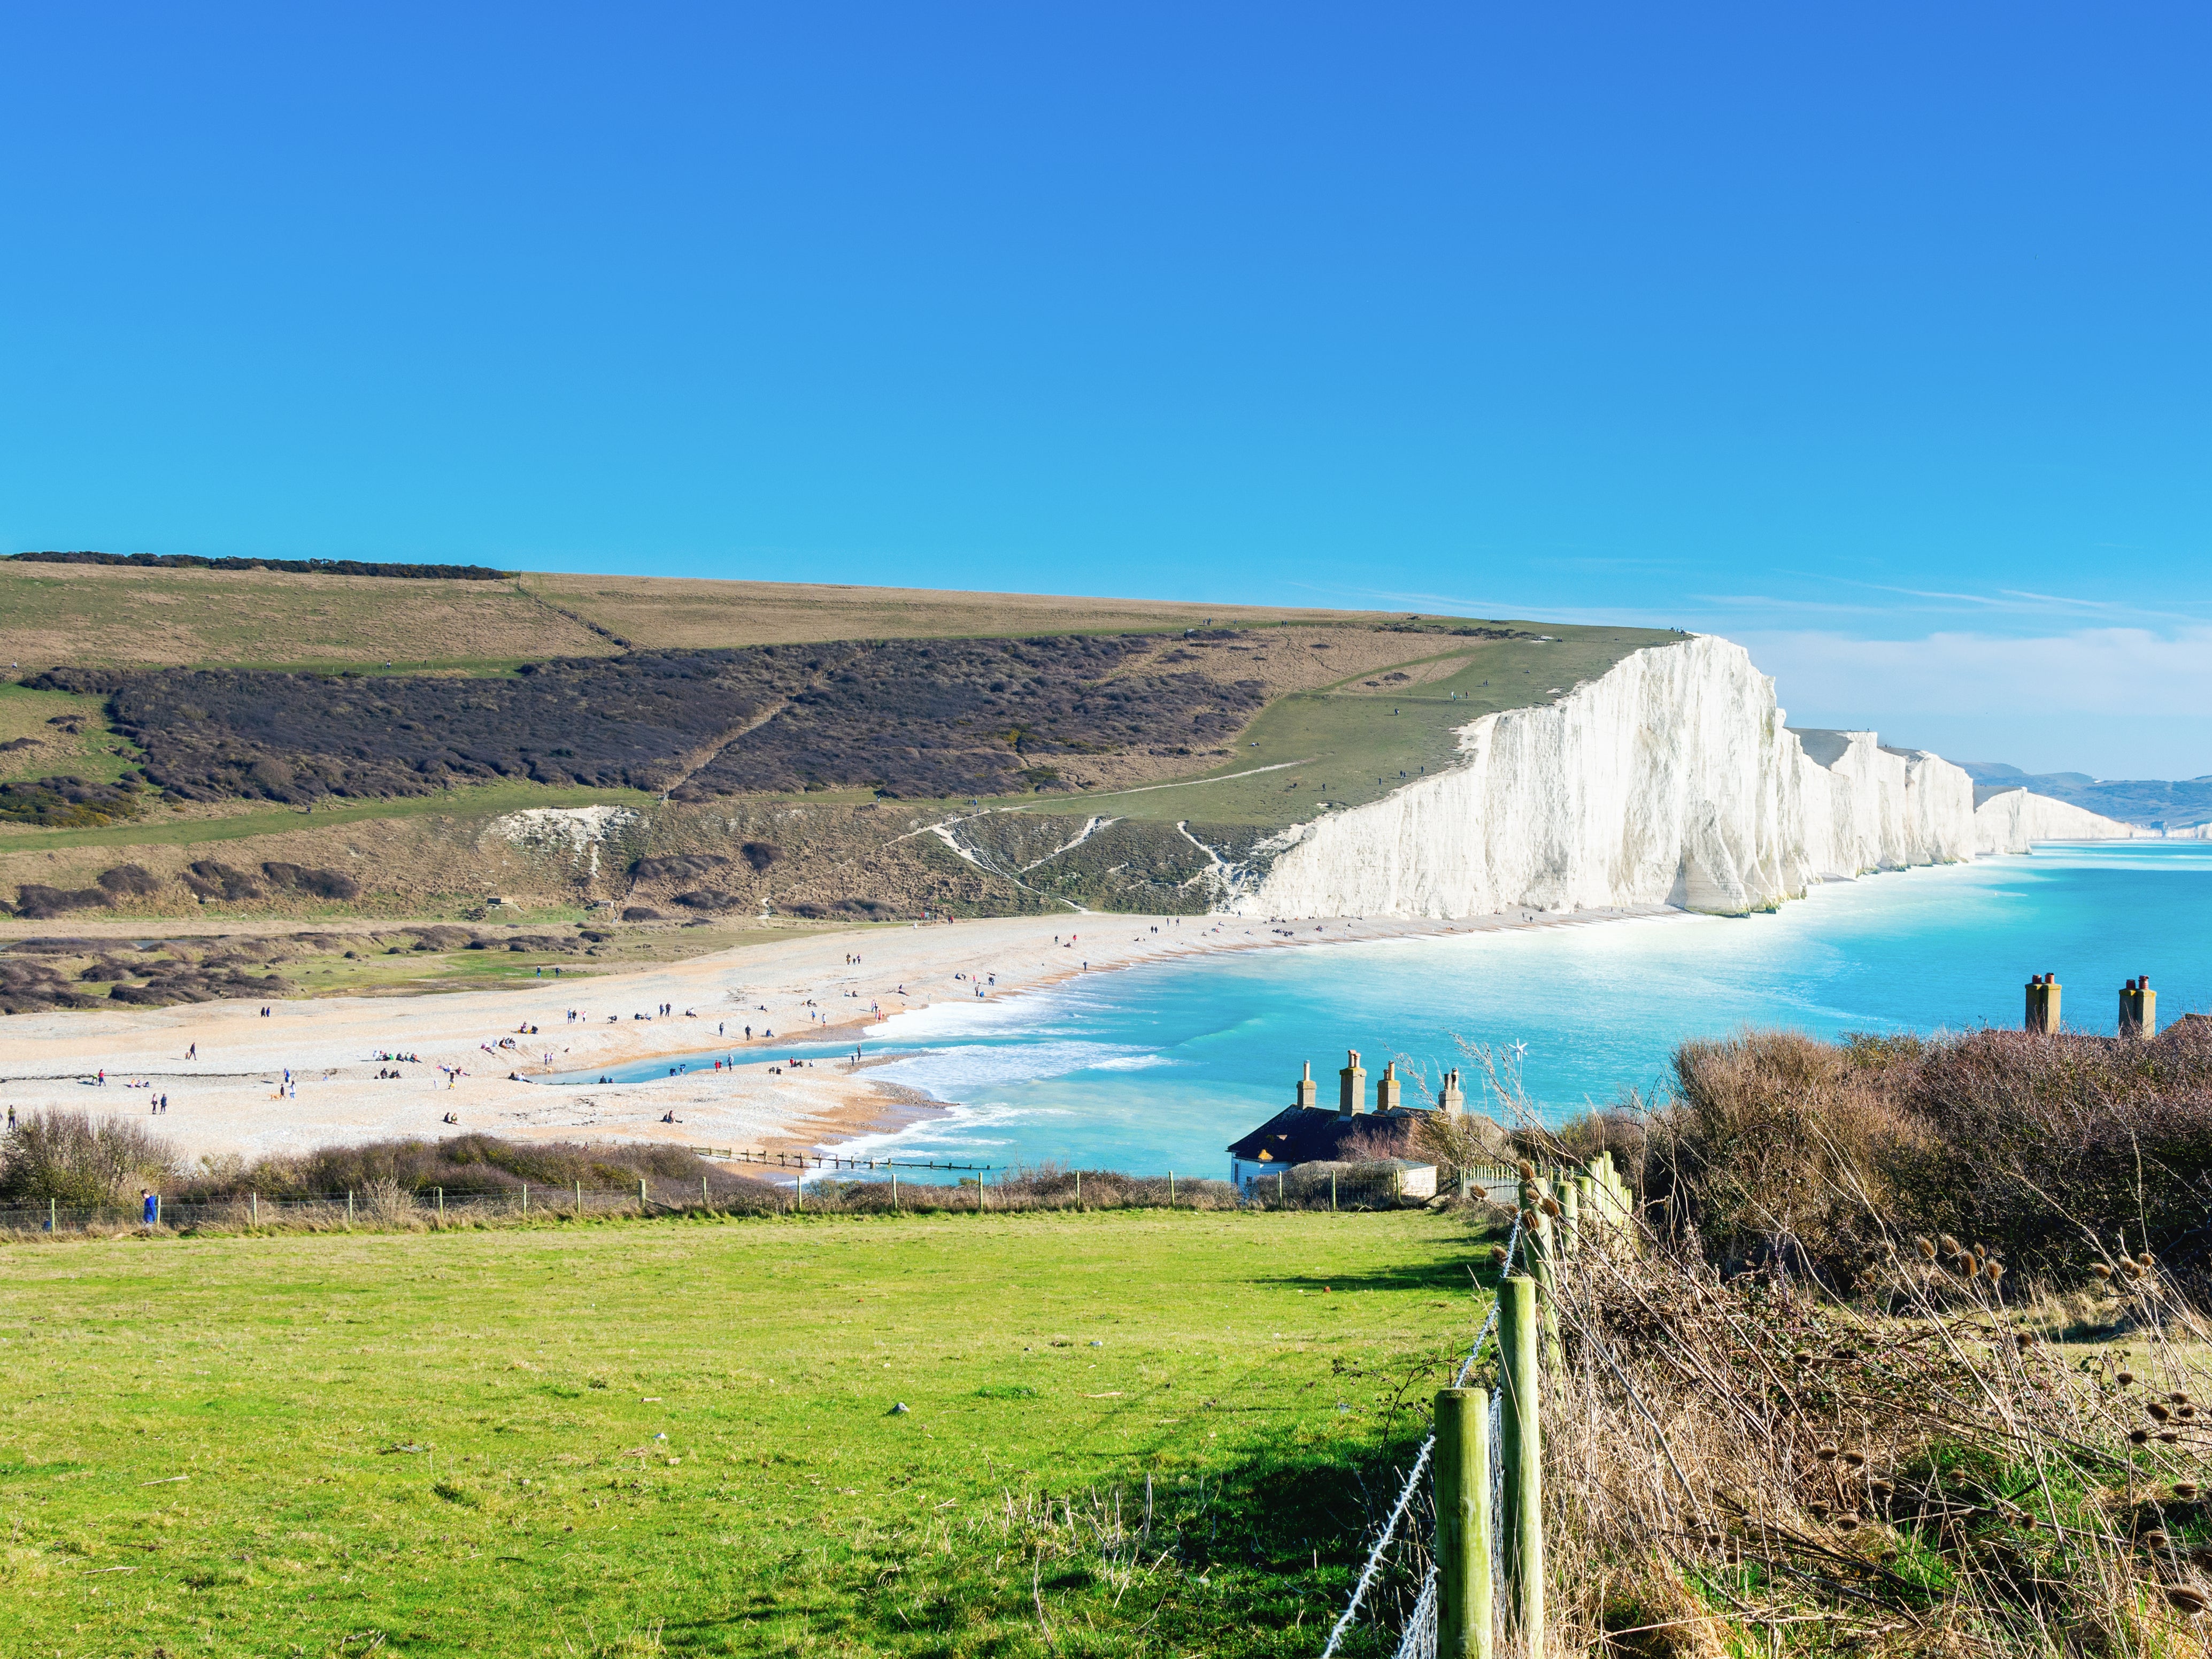 Soak up the views of the white chalk cliffs while walking down to Cuckmere Haven Beach